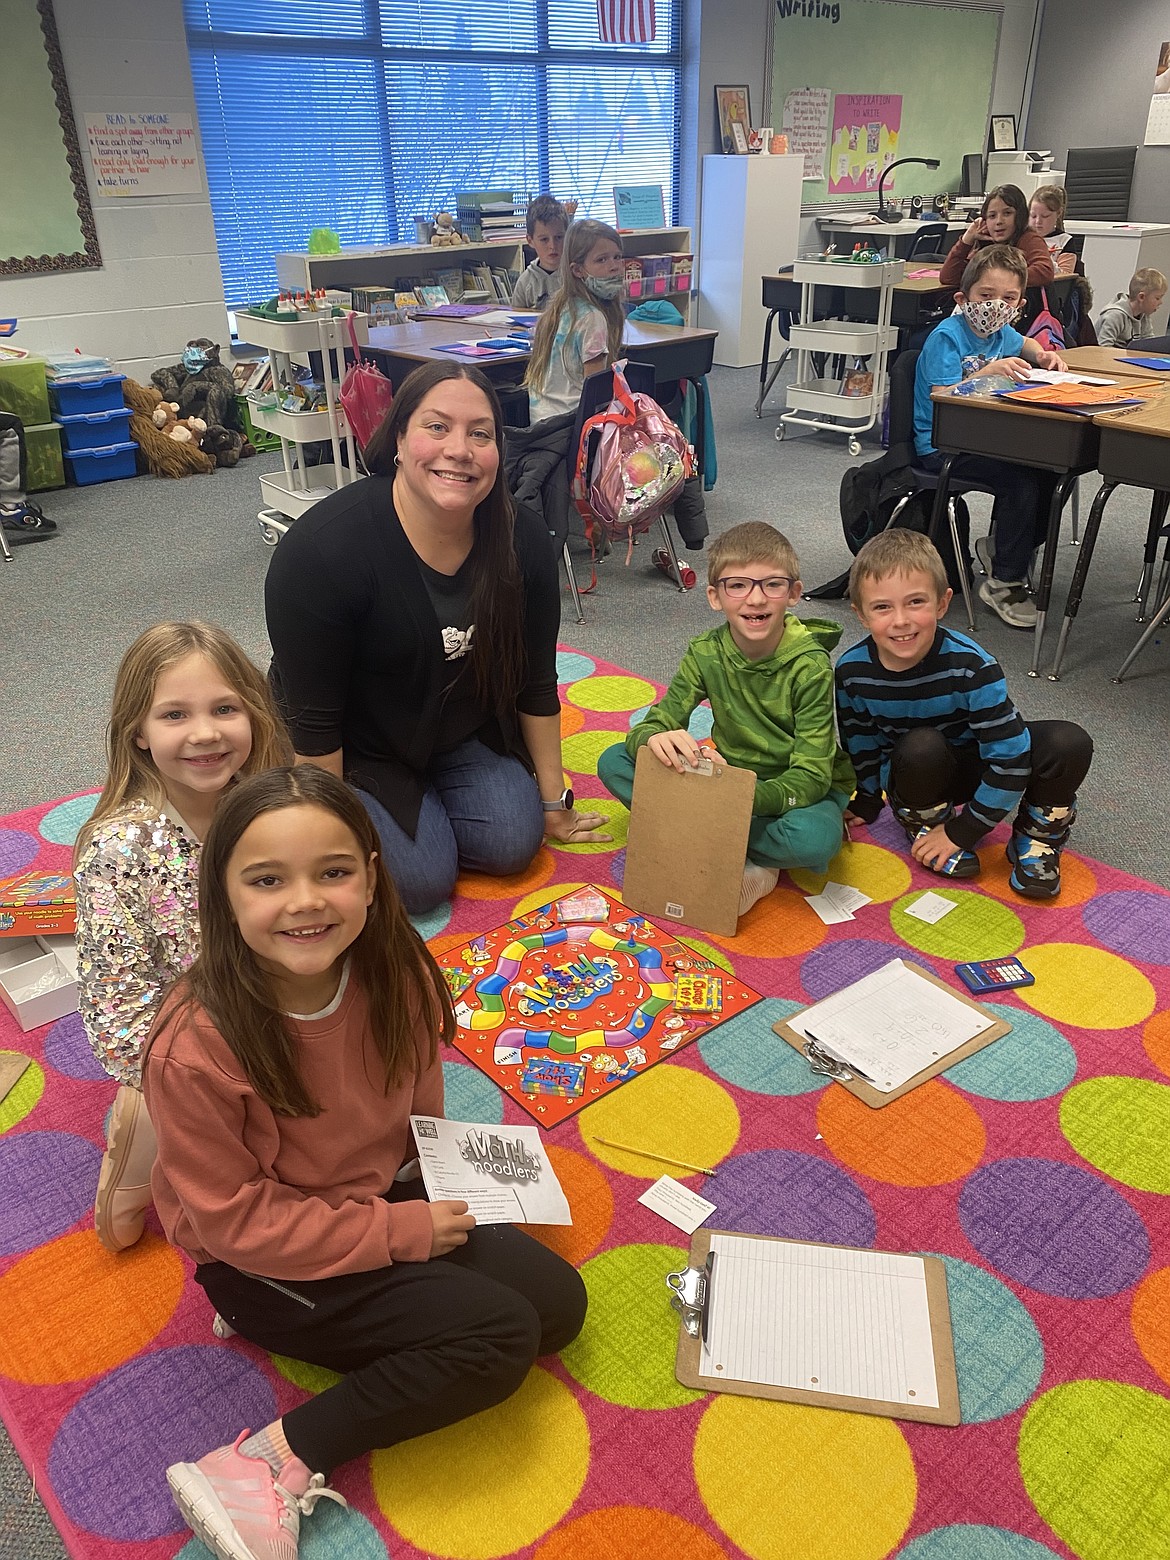 Friday at Prairie View Elementary School, second grade teacher Sarah Triphahn, center, sits with her students, from left: June Laos, Lavender Lepley, Everett Lohmon and Asher Grant.